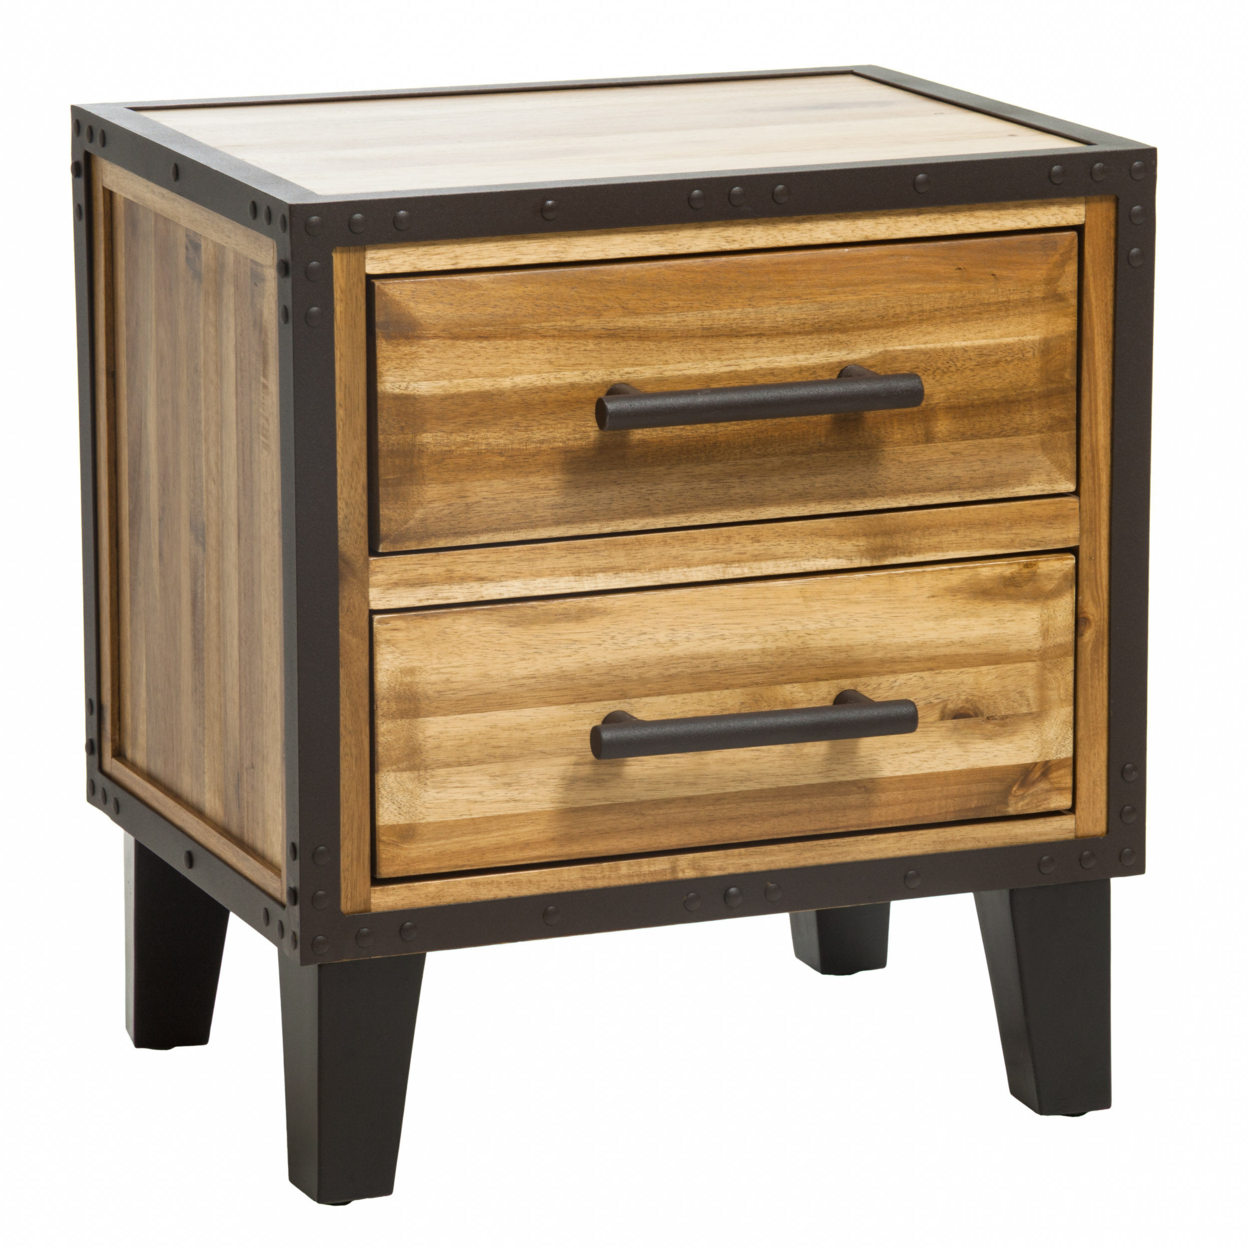 Glendora Natural Stain Solid Wood Two Drawer Nightstand